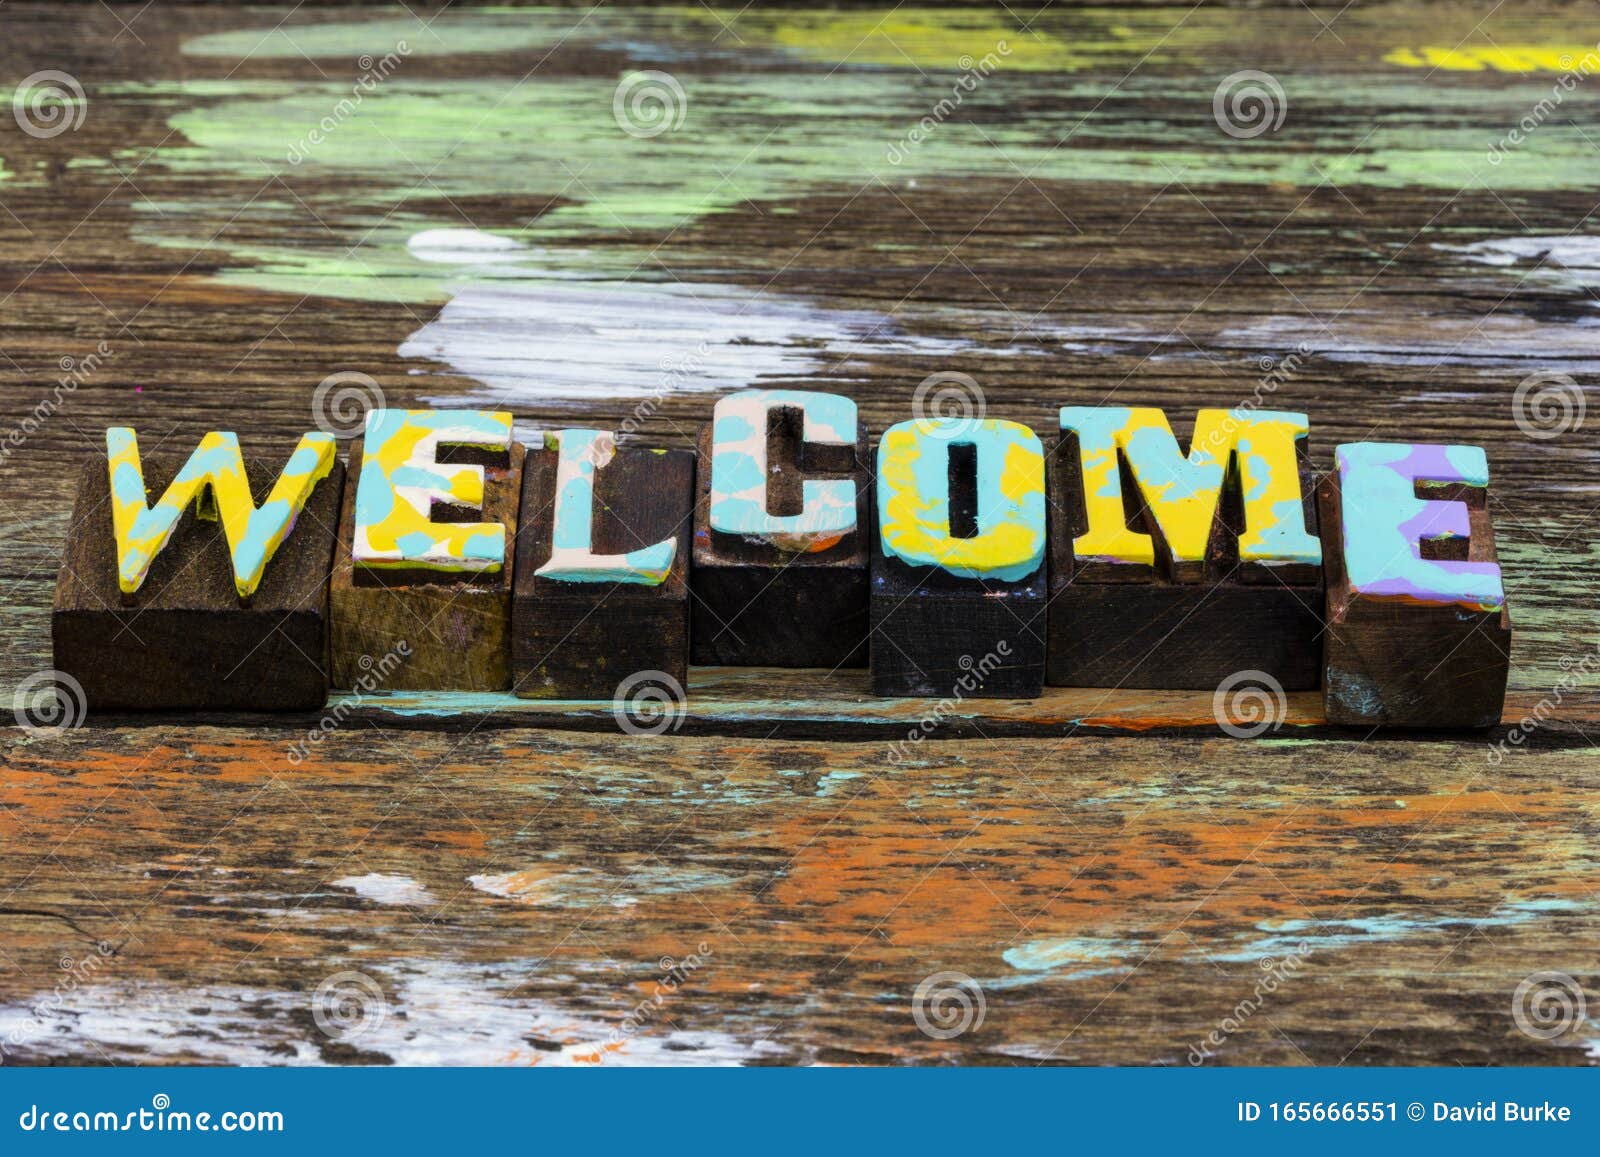 welcome home friends friendly greeting family hospitality